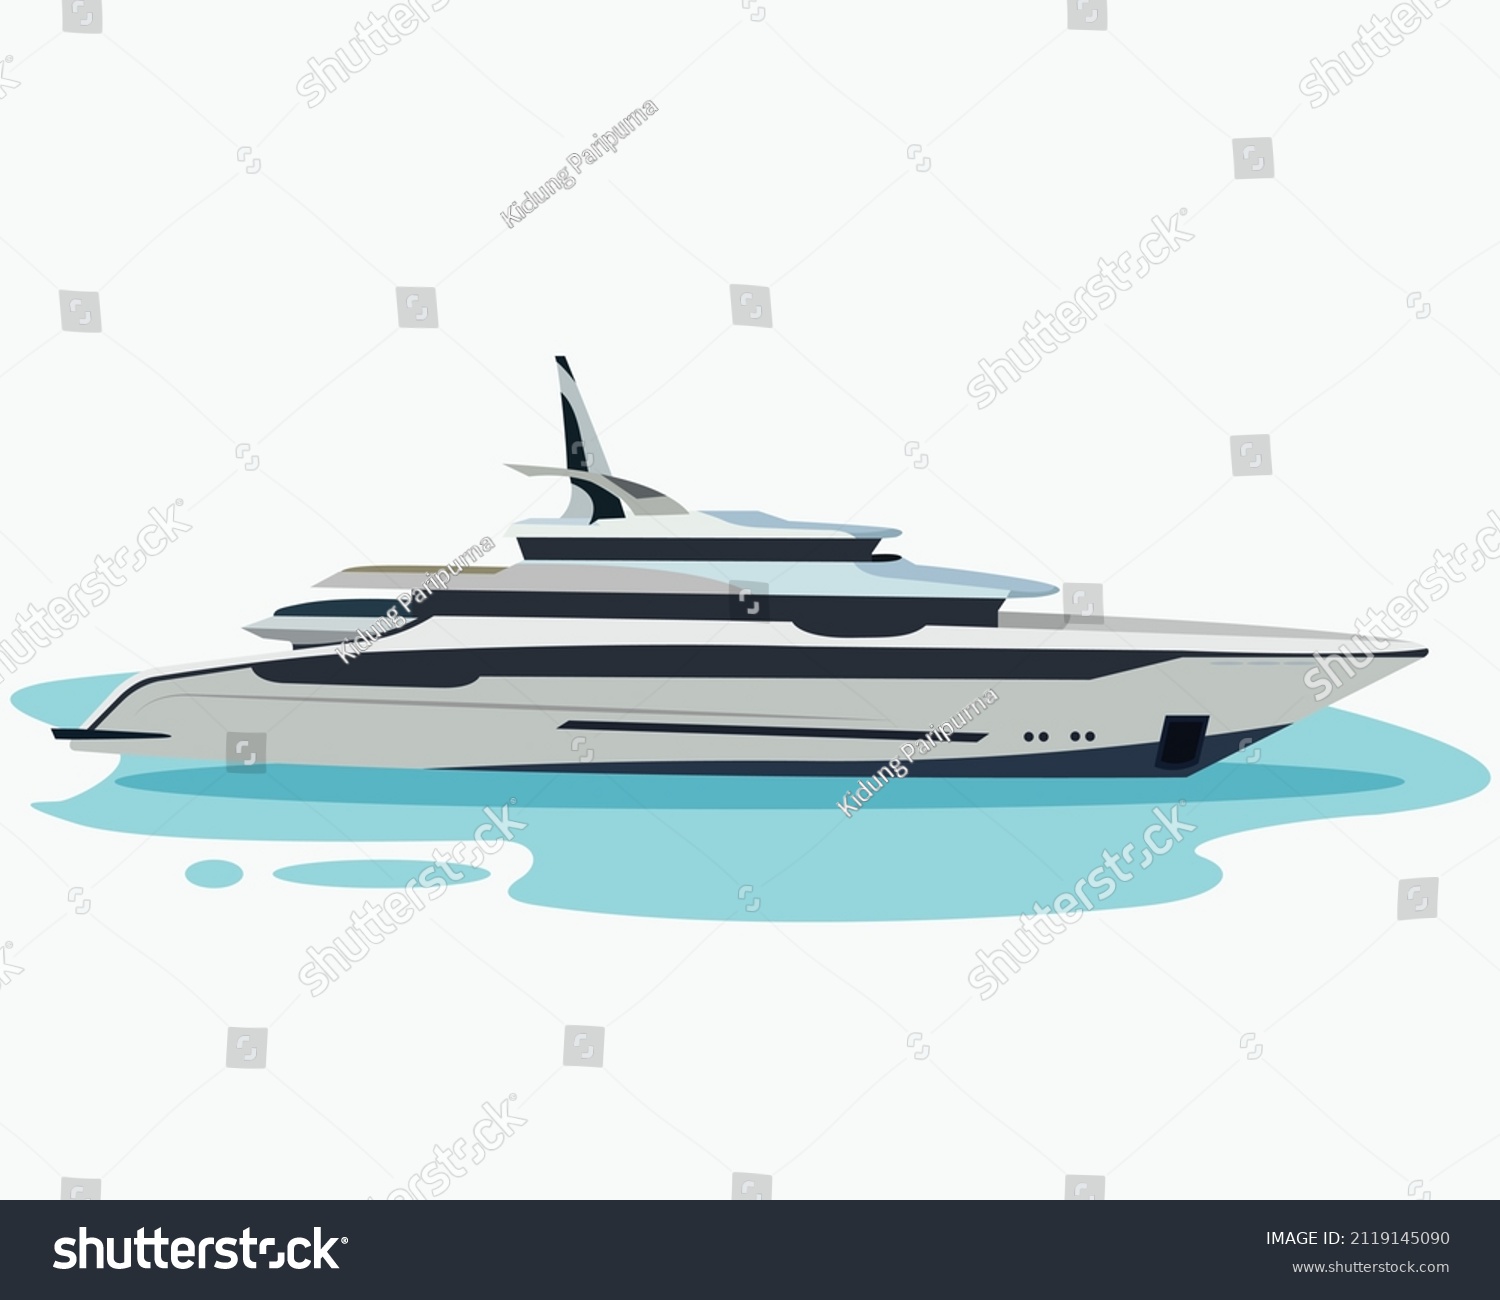 Super motor yacht at sea. Vector illustration of yacht or vessel with solid background. Luxurious ship for trip or party in the ocean, yacht illustration for rent or for sale, boat icon on the ocean #2119145090